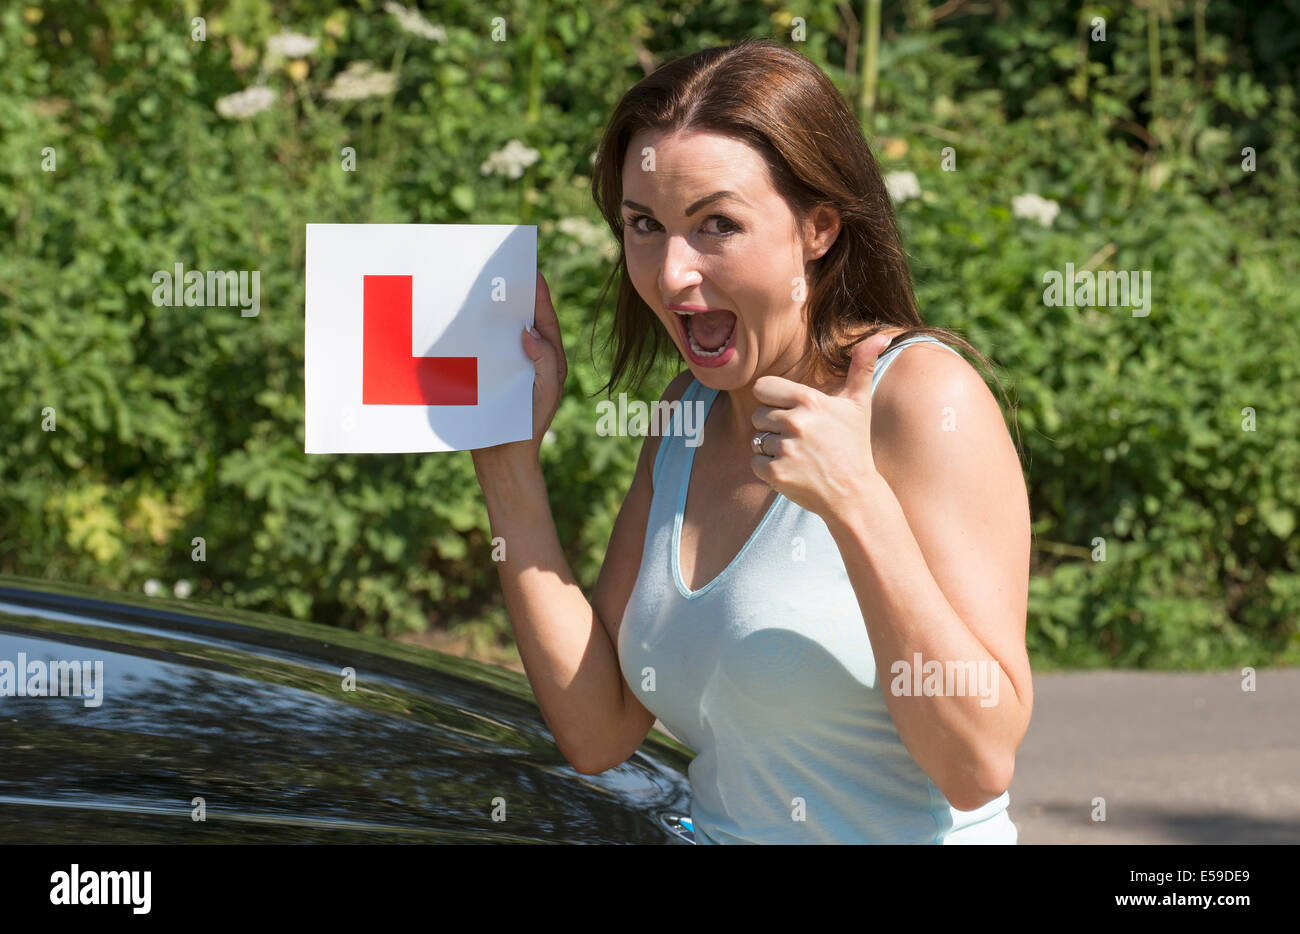 Portrait of a jubilant driver with L plate after passing her driving test. Giving a thumbs up sign Stock Photo